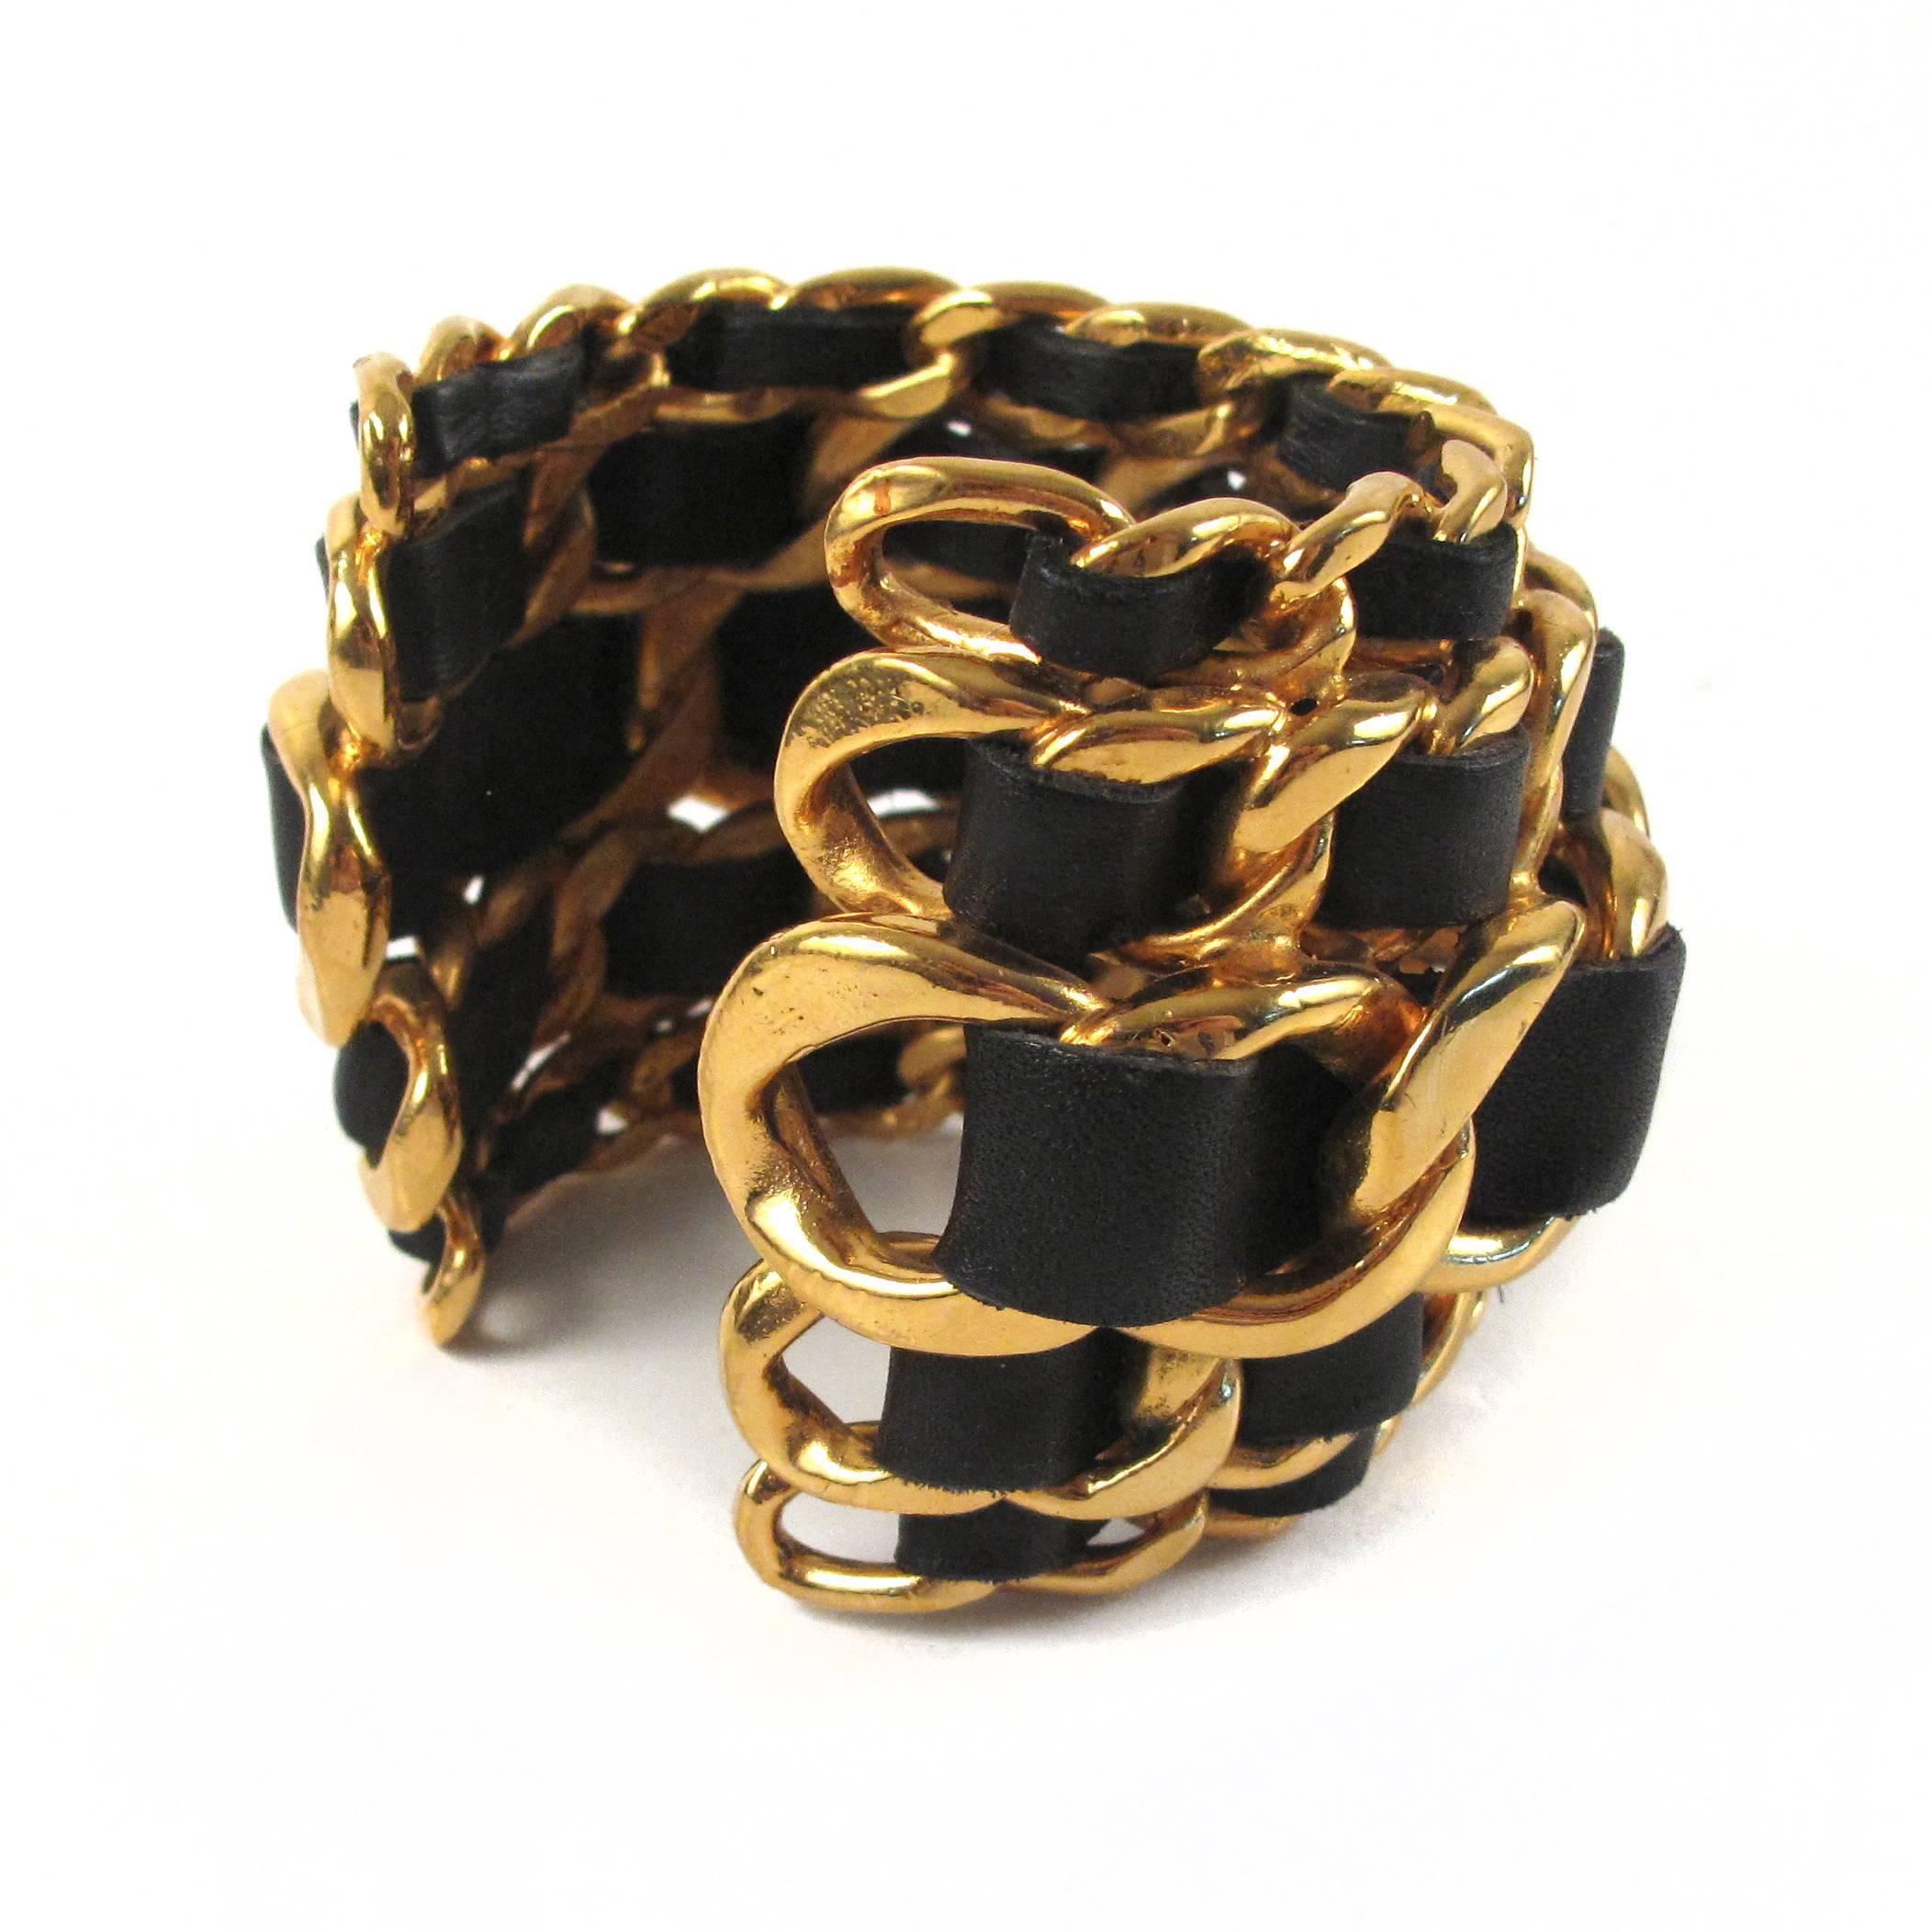 Chanel - Vintage Woven Wide Chain Cuff

Color: Black / Gold

Material: Leather / Metal 

------------------------------------------------------------

Details:

- gold tone hardware

- black woven leather

- stamped 26 - from